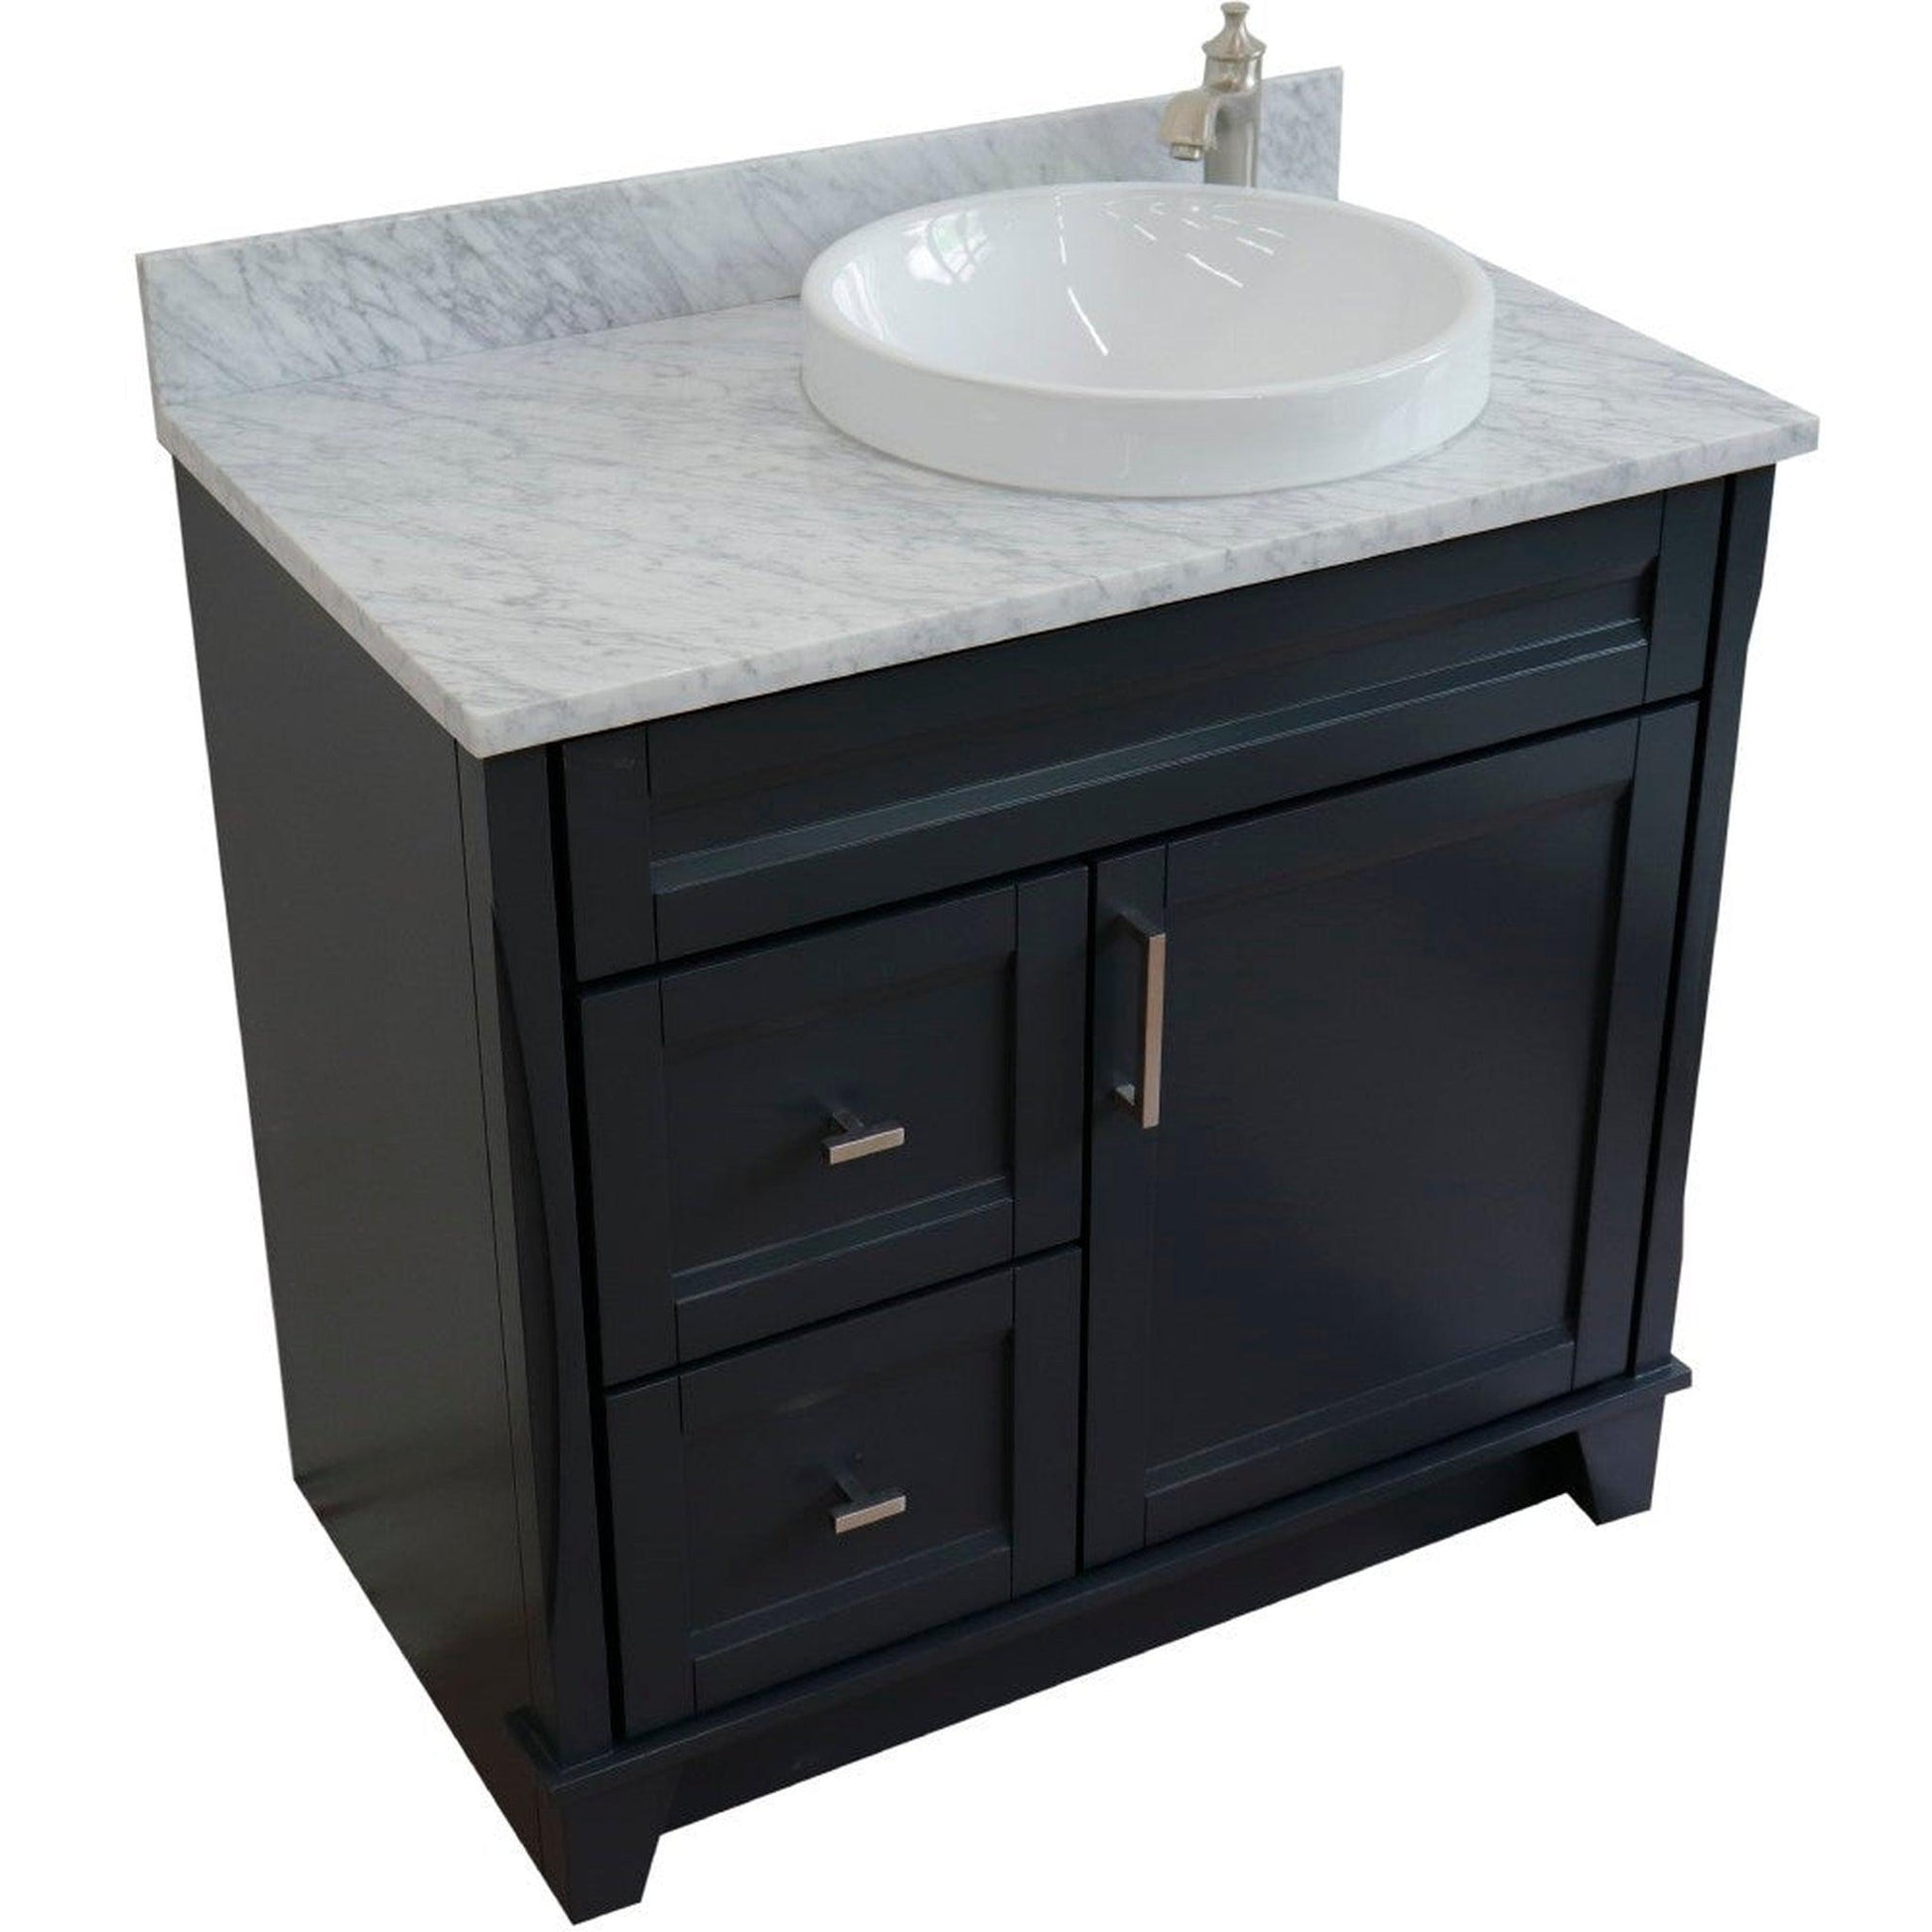 Bellaterra Home Terni 37" 1-Door 2-Drawer Dark Gray Freestanding Vanity Set With Ceramic Right Offset Vessel Sink and White Carrara Marble Top, and Right Door Base